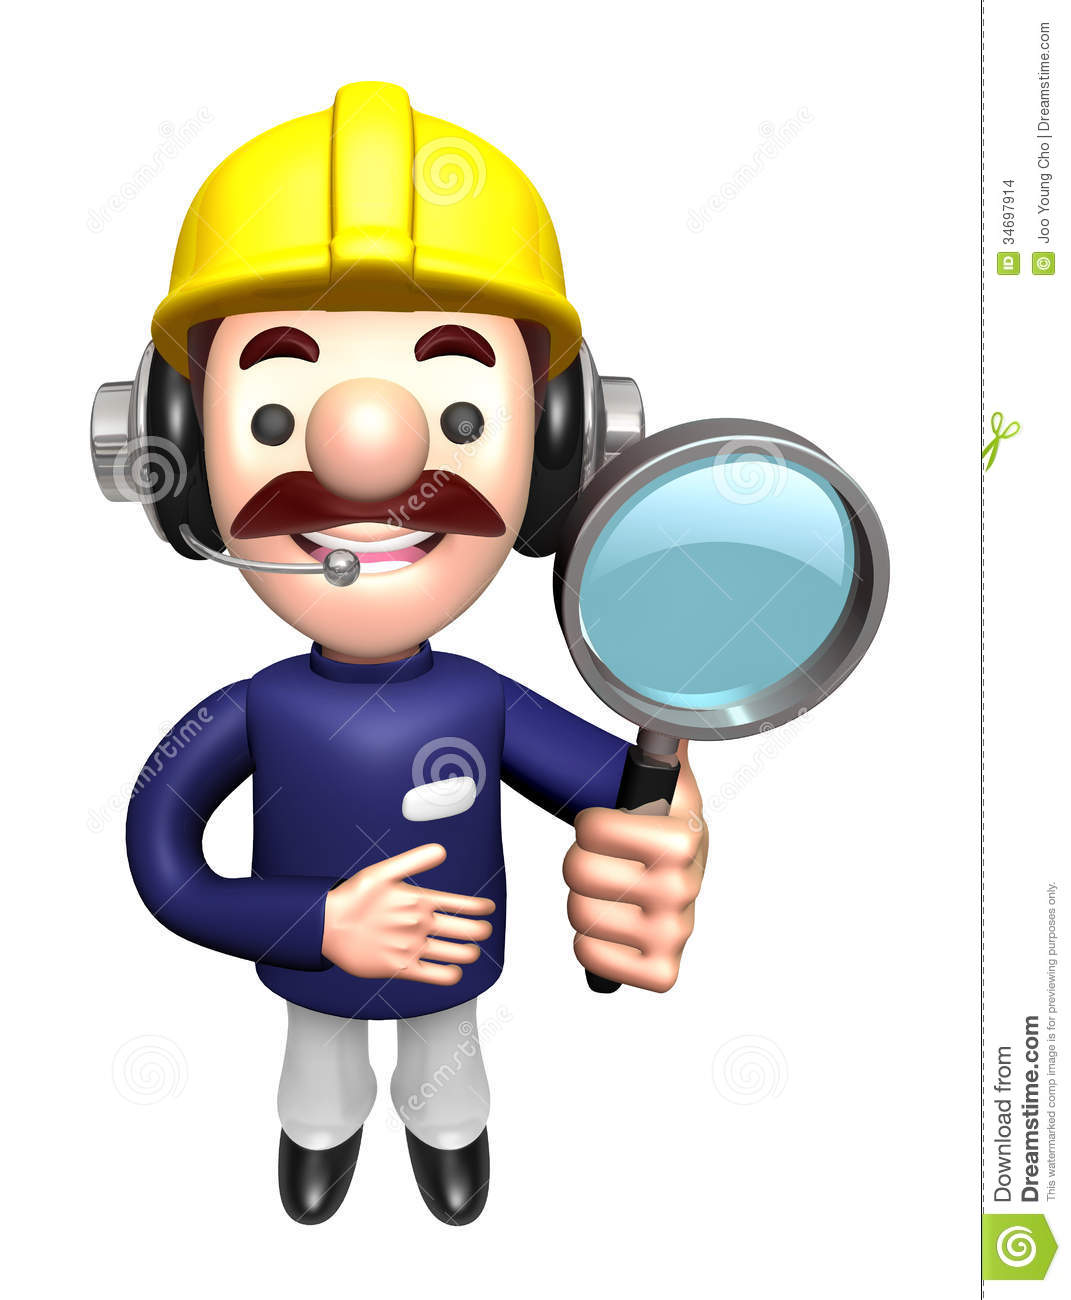 3D Construction Site Man Mascot Examine A With Magnifying Glass.